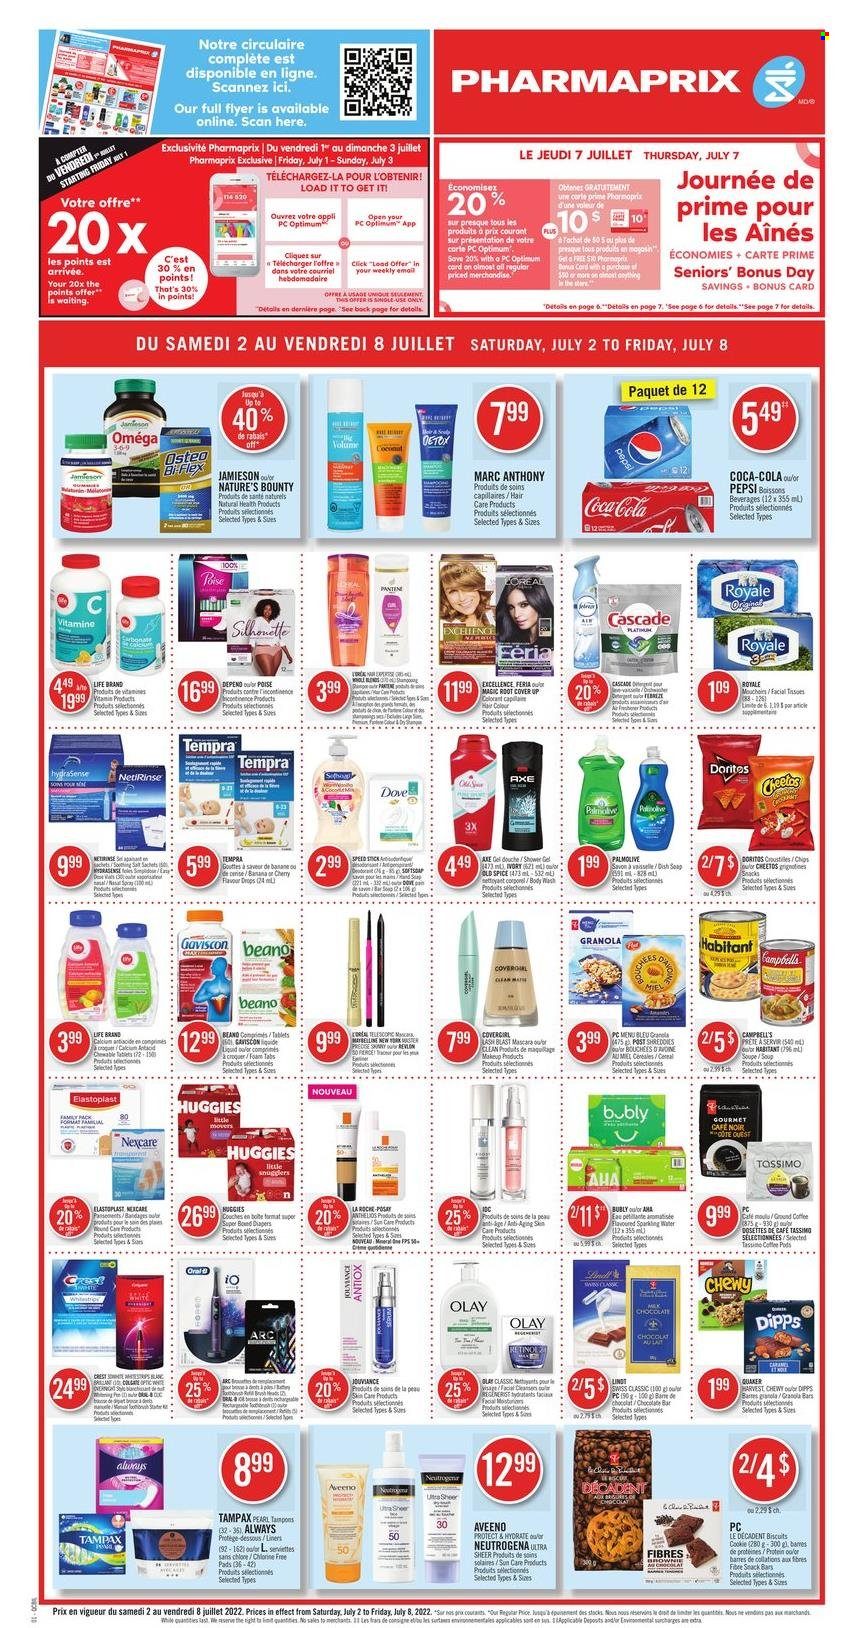 thumbnail - Pharmaprix Flyer - July 02, 2022 - July 08, 2022 - Sales products - brownies, cherries, coconut, Campbell's, soup, Quaker, chocolate, snack, biscuit, snack bar, Doritos, Cheetos, salt, granola bar, spice, caramel, Coca-Cola, Pepsi, sparkling water, coffee pods, ground coffee, nappies, Aveeno, Febreze, Clean Mate, Cascade, body wash, shower gel, Palmolive, soap bar, soap, Crest, tampons, L’Oréal, La Roche-Posay, Olay, Revlon, hair color, Axe, makeup, mascara, Maybelline, paper, Optimum, Nature's Bounty, Omega-3, Osteo bi-flex, Bi-Flex, Gaviscon, Antacid, calcium, detergent, Dove, Colgate, Neutrogena, Tampax, Huggies, Pantene, Old Spice, Lindt. Page 1.